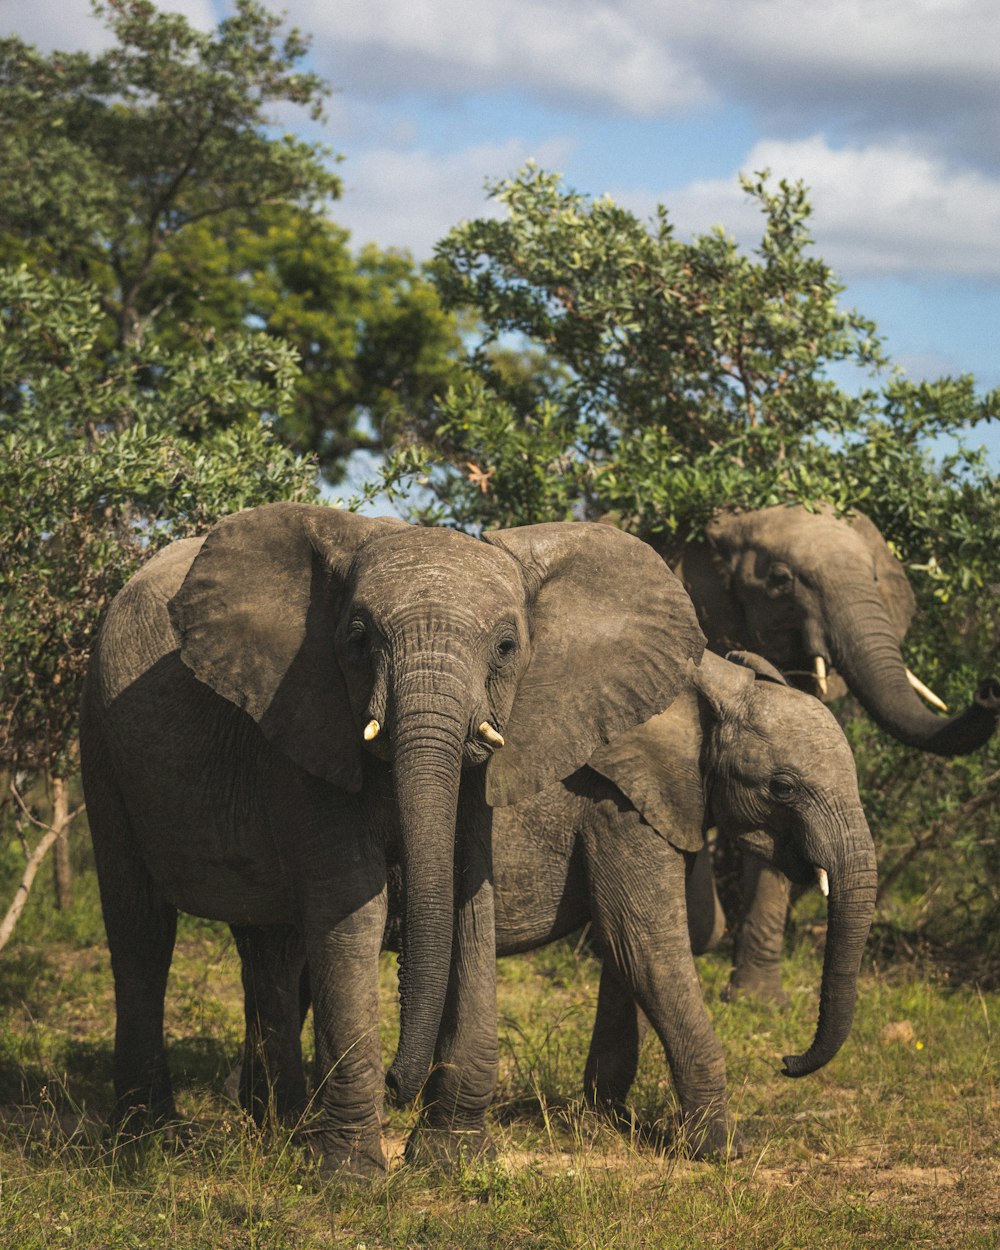 a group of elephants stand in a grassy field